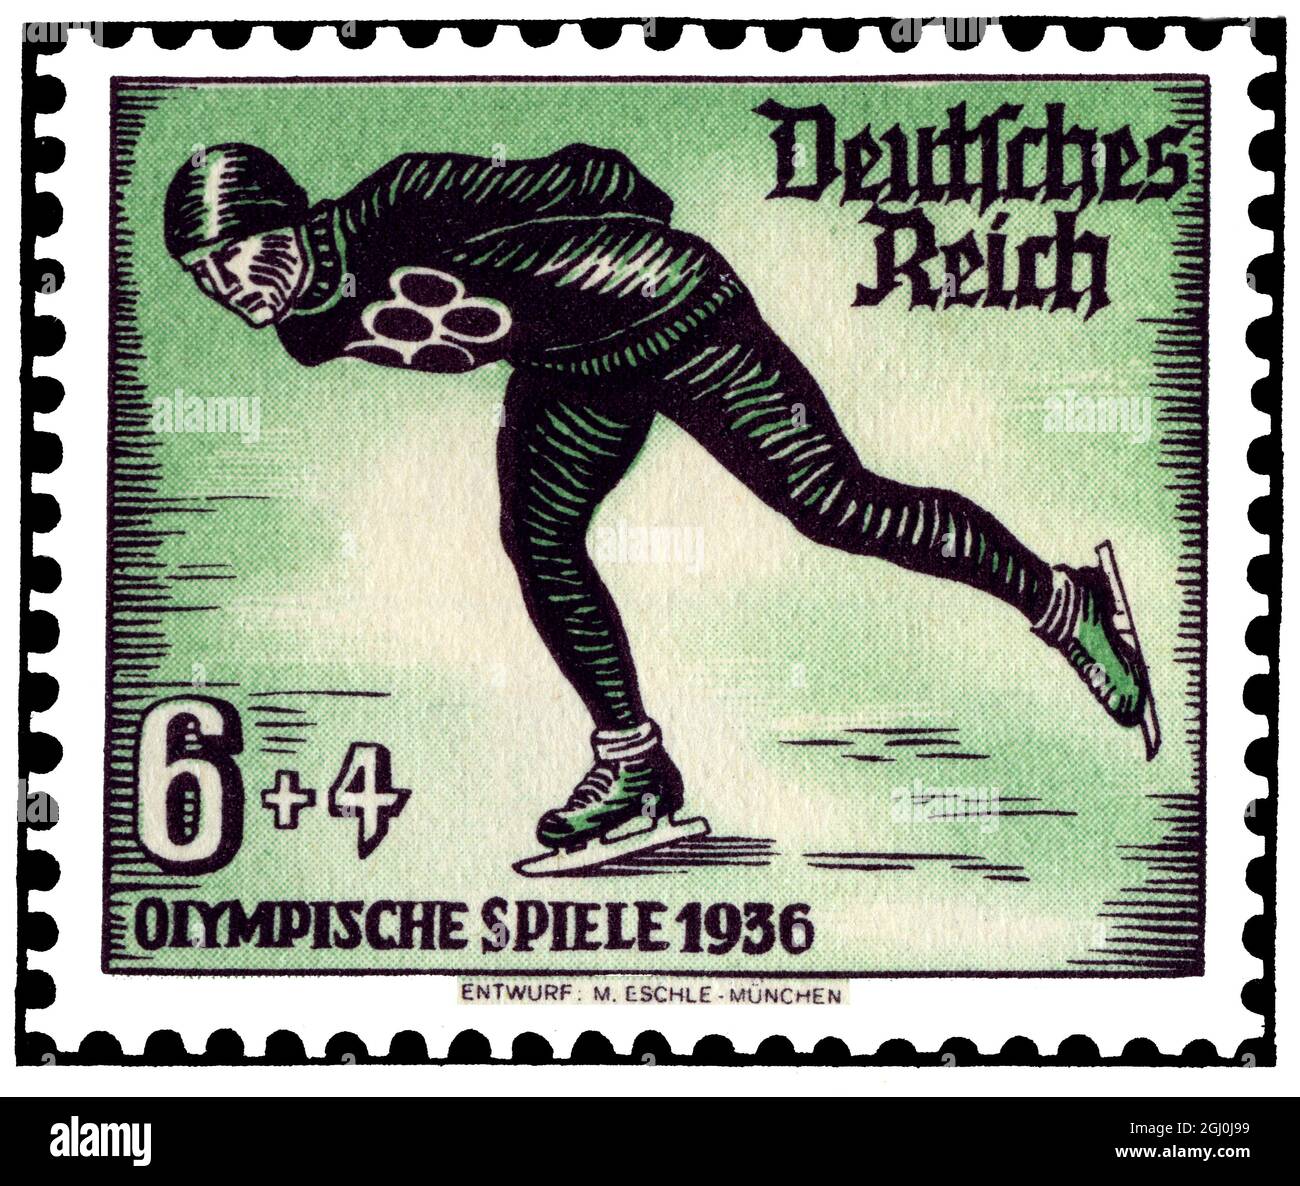 1936 Olympic Games stamp - Germany - Entwerf M. Eschle-Munchen ©TopFoto Stock Photo